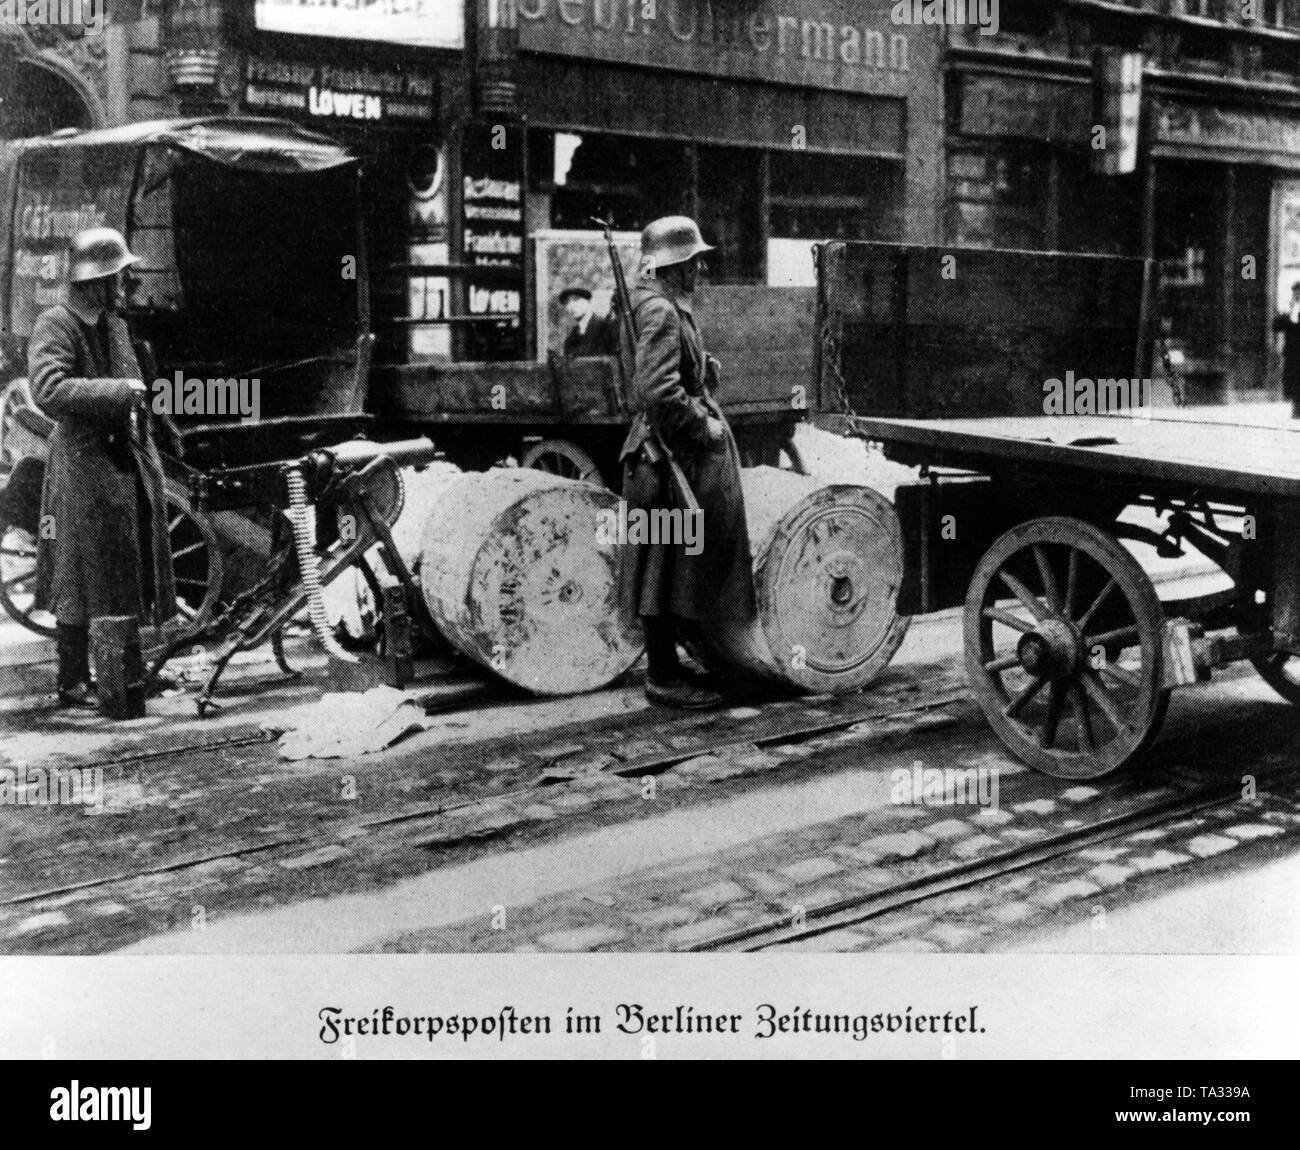 Loyalist Freikorps units guard a street with a barricade in Berlin's Zeitungsviertel against insurgents of the January Uprising. During the unrest there were armed conflicts between left-wing revolutionaries and government-loyal Freikorps units. Stock Photo